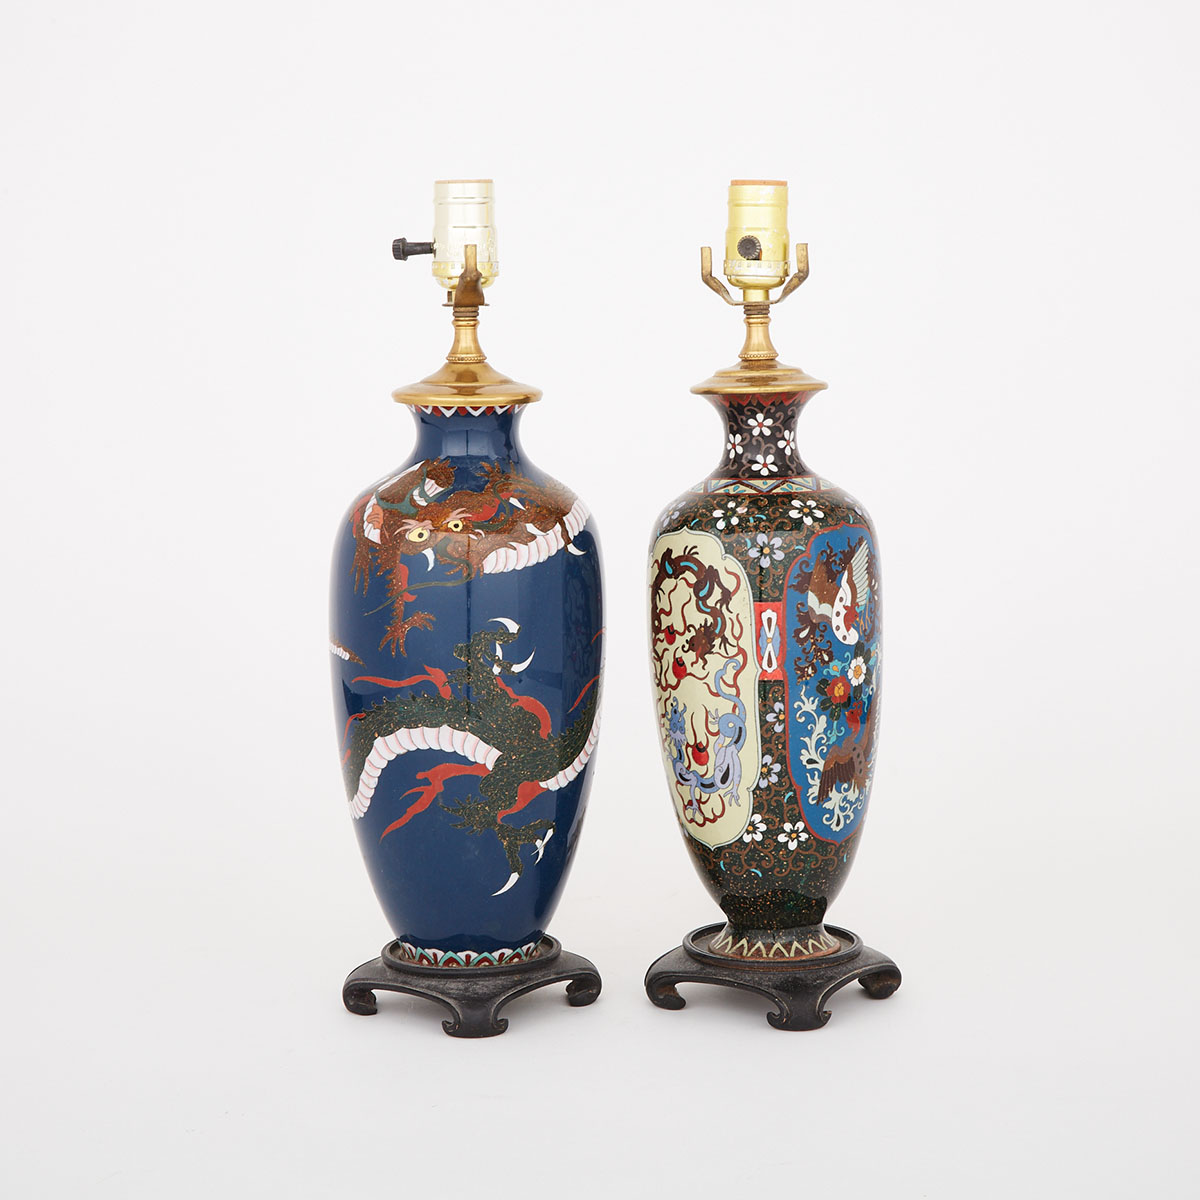 Two Cloisonné Vases Mounted as Lamps